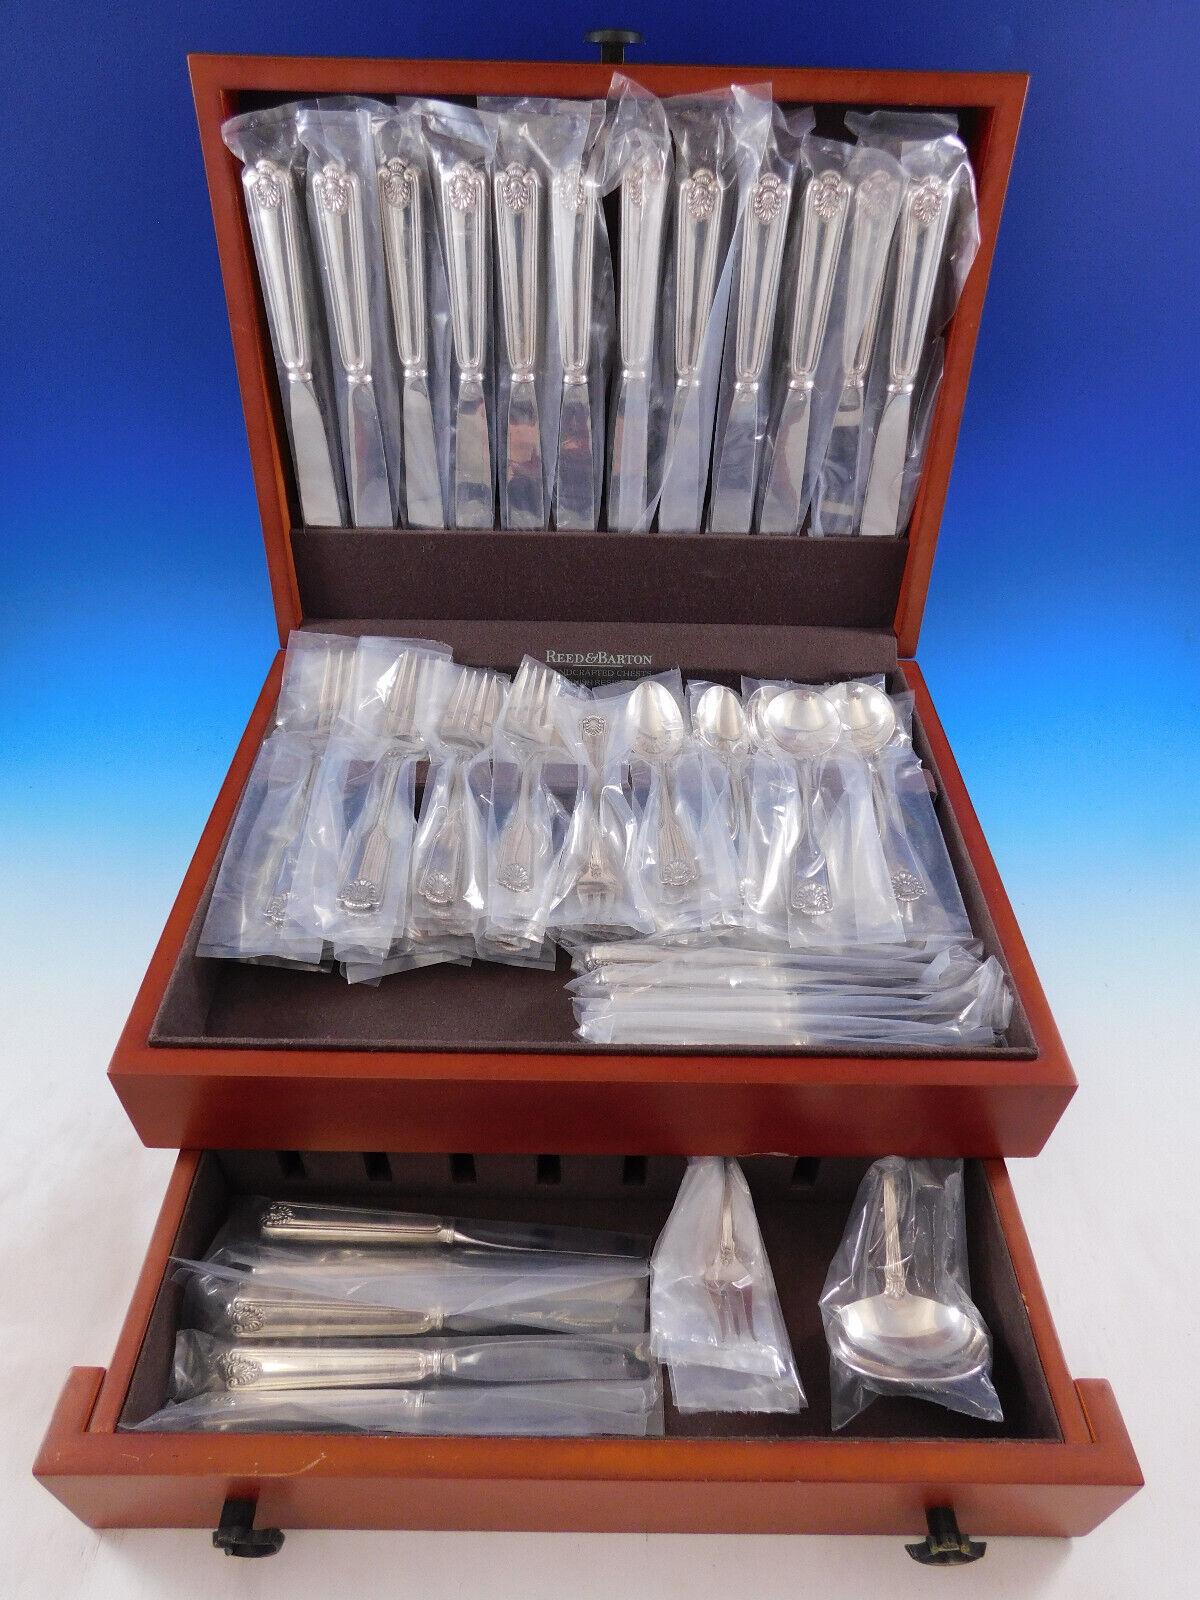 Dinner Size Fiddle Shell by Frank Smith Sterling Silver Flatware set, 85 pieces. This popular Classic pattern was first offered in 1914 and was discontinued in 2003. This set includes:
12 Dinner Size Knives, modern blades, 9 1/2